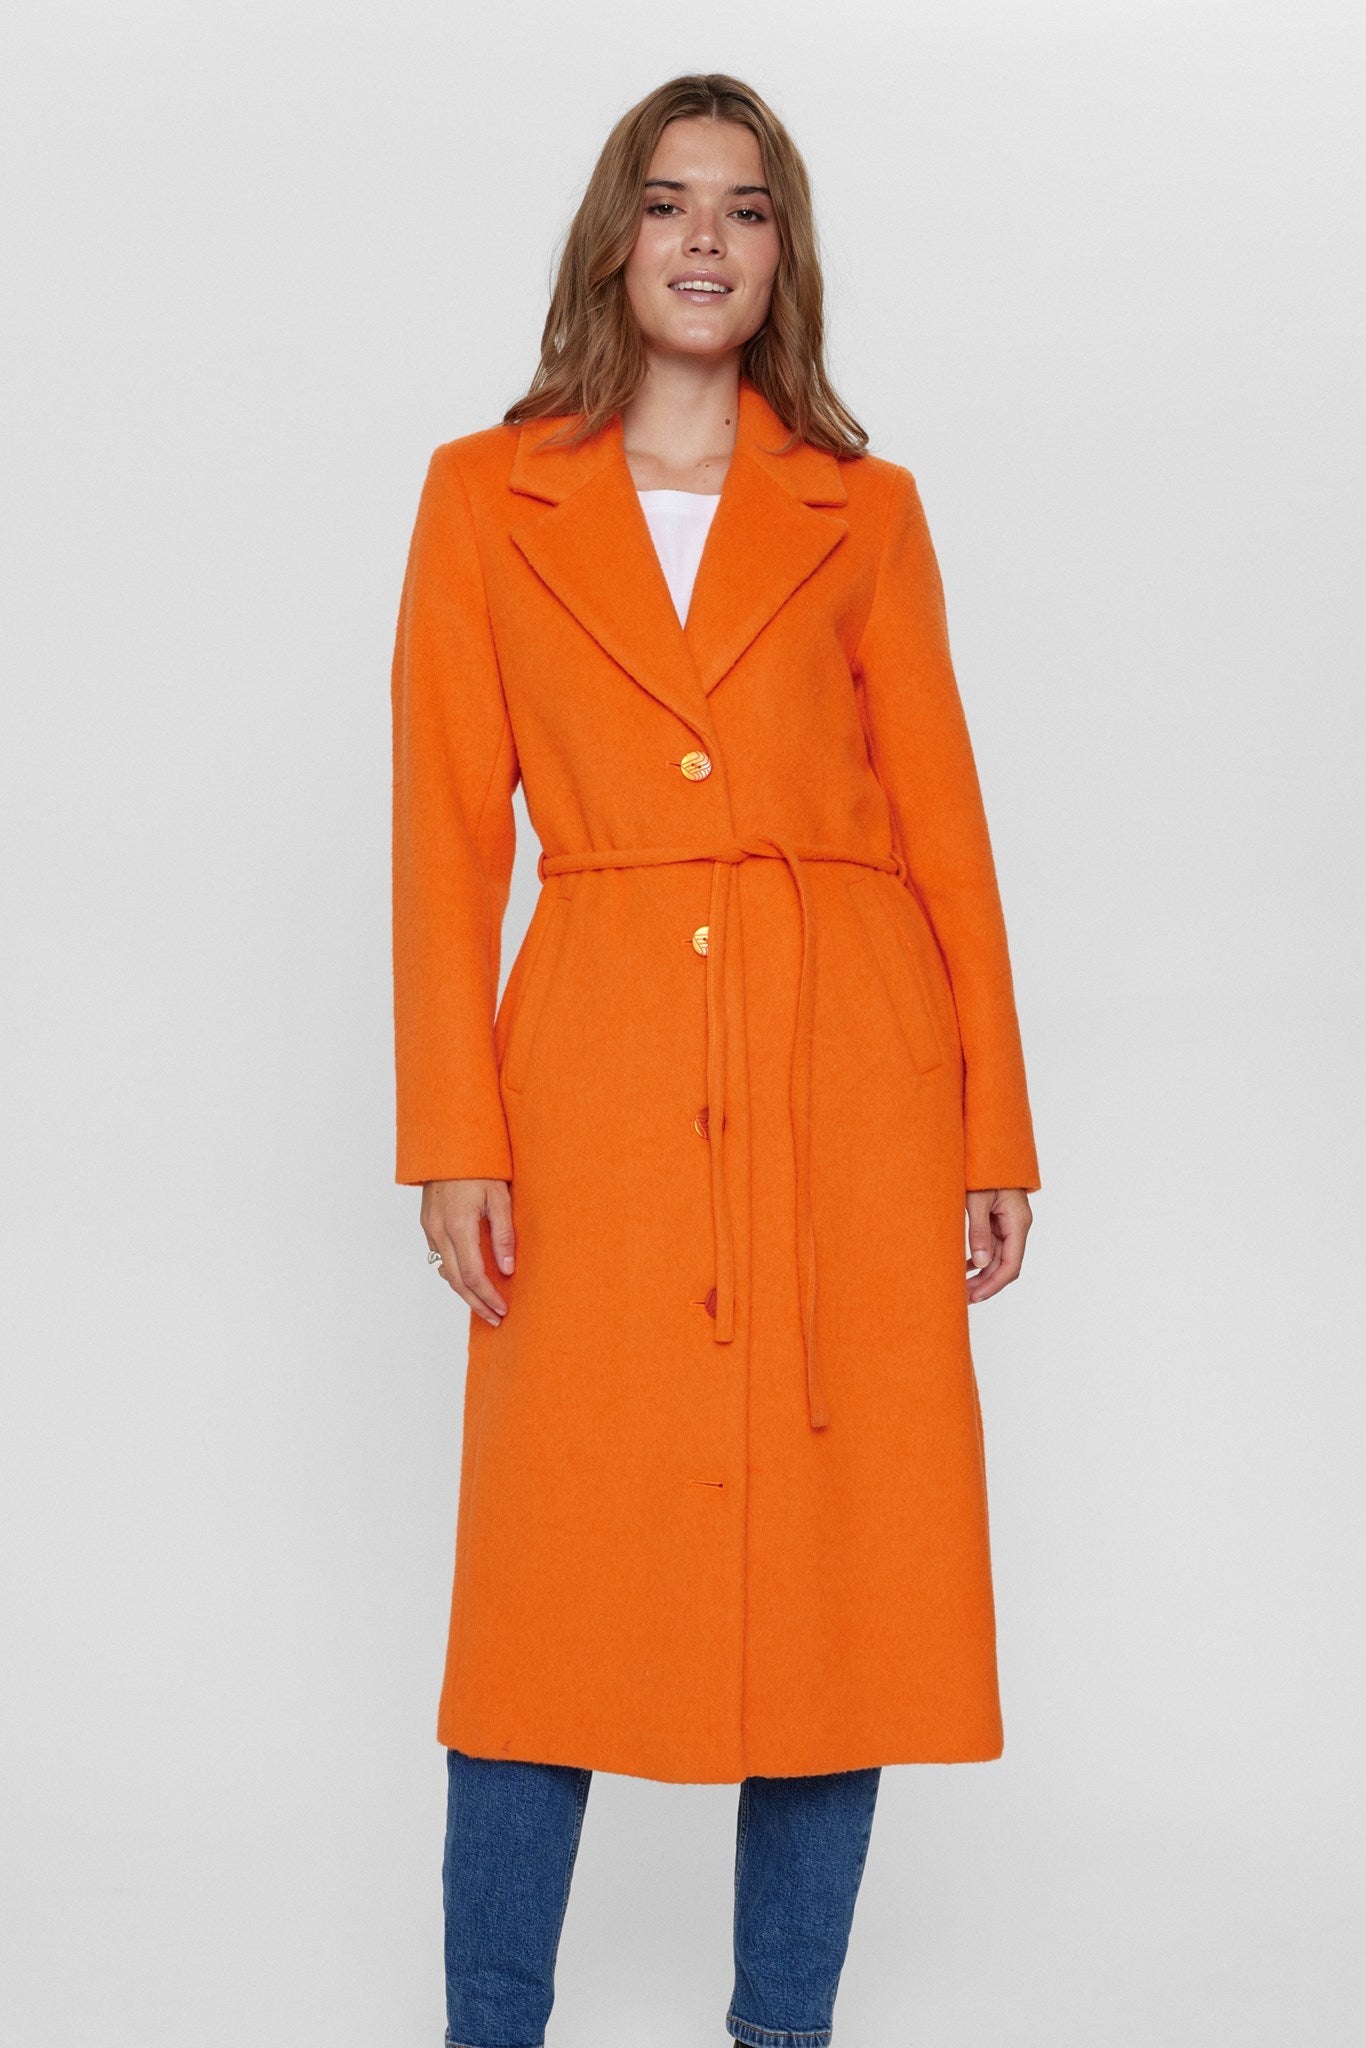 PRE-OWNED NUGRY COAT - Red Orange